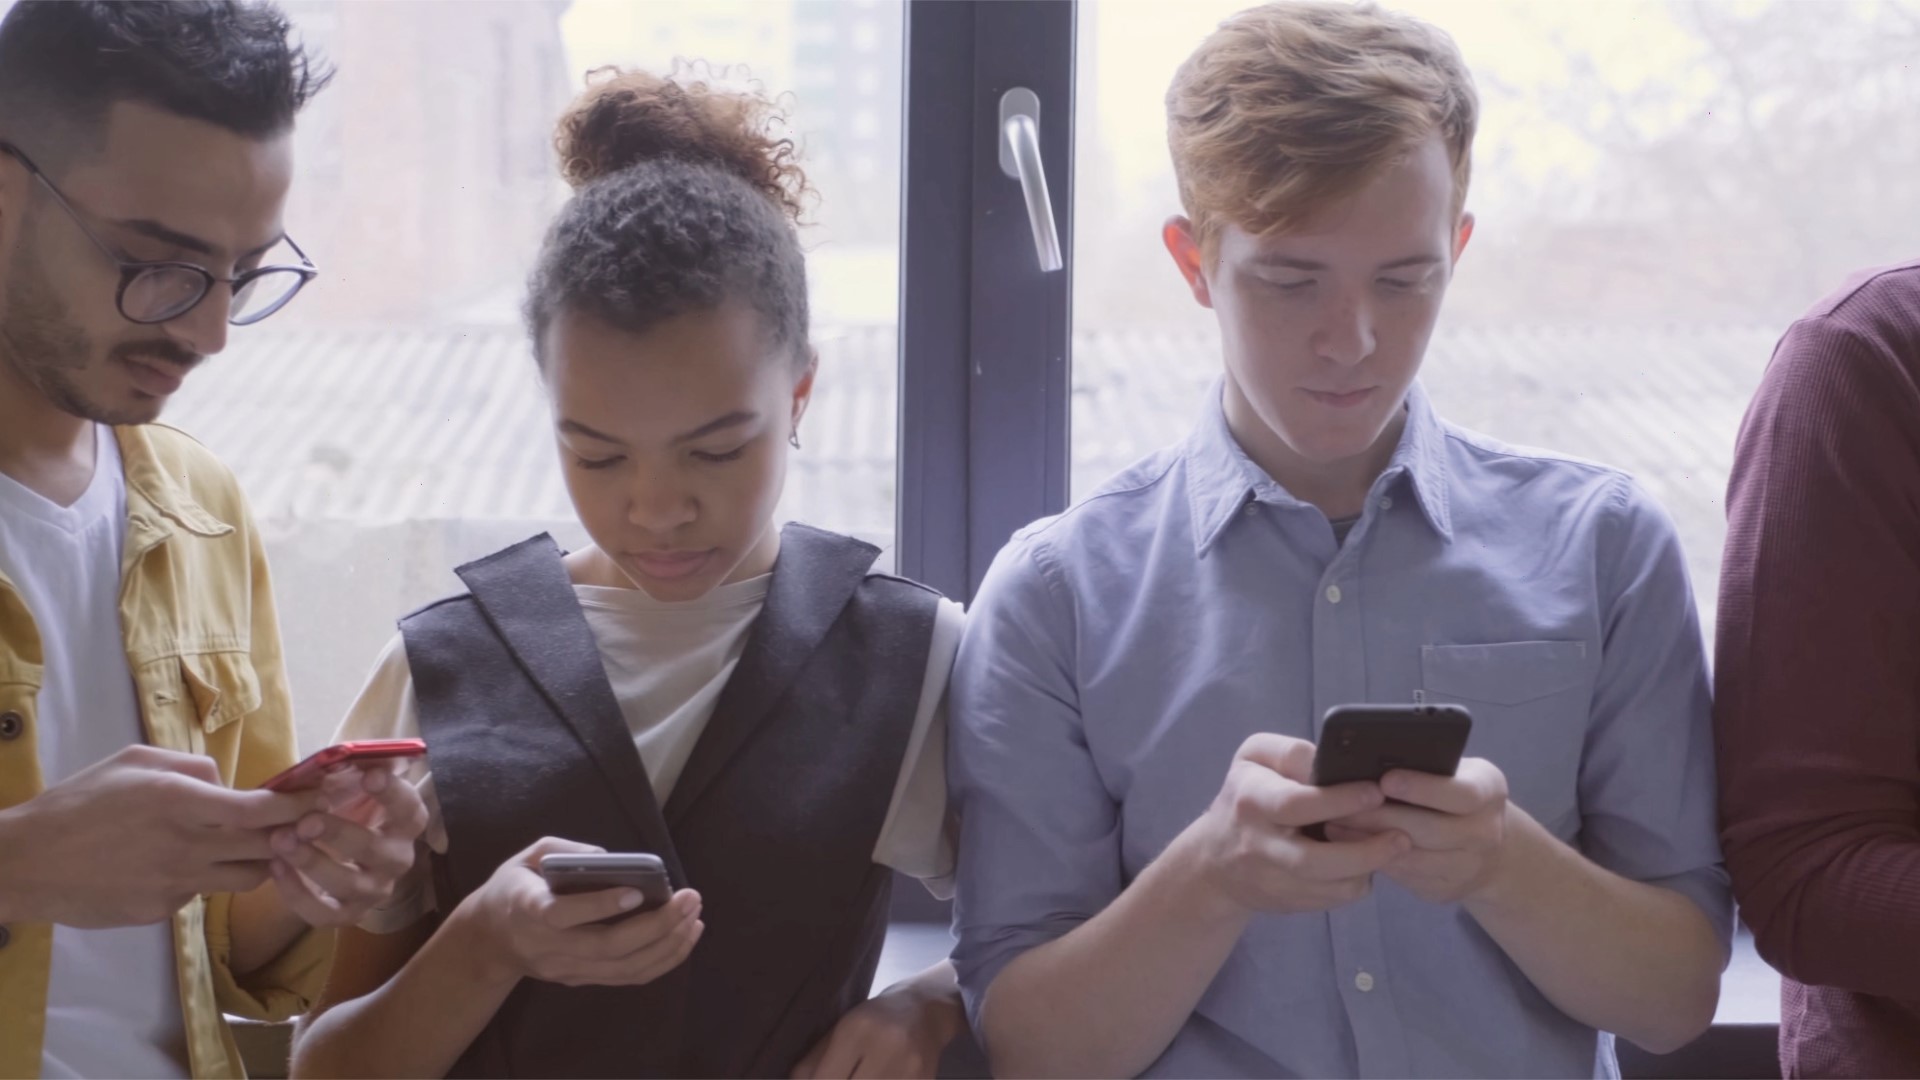 We've all had experiences where we talk to someone about something and a day or even a few hours later we see an ad for it. Here's why it feels like your phone is always listening and what you can do about it. Veuer's Johana Restrepo has more.